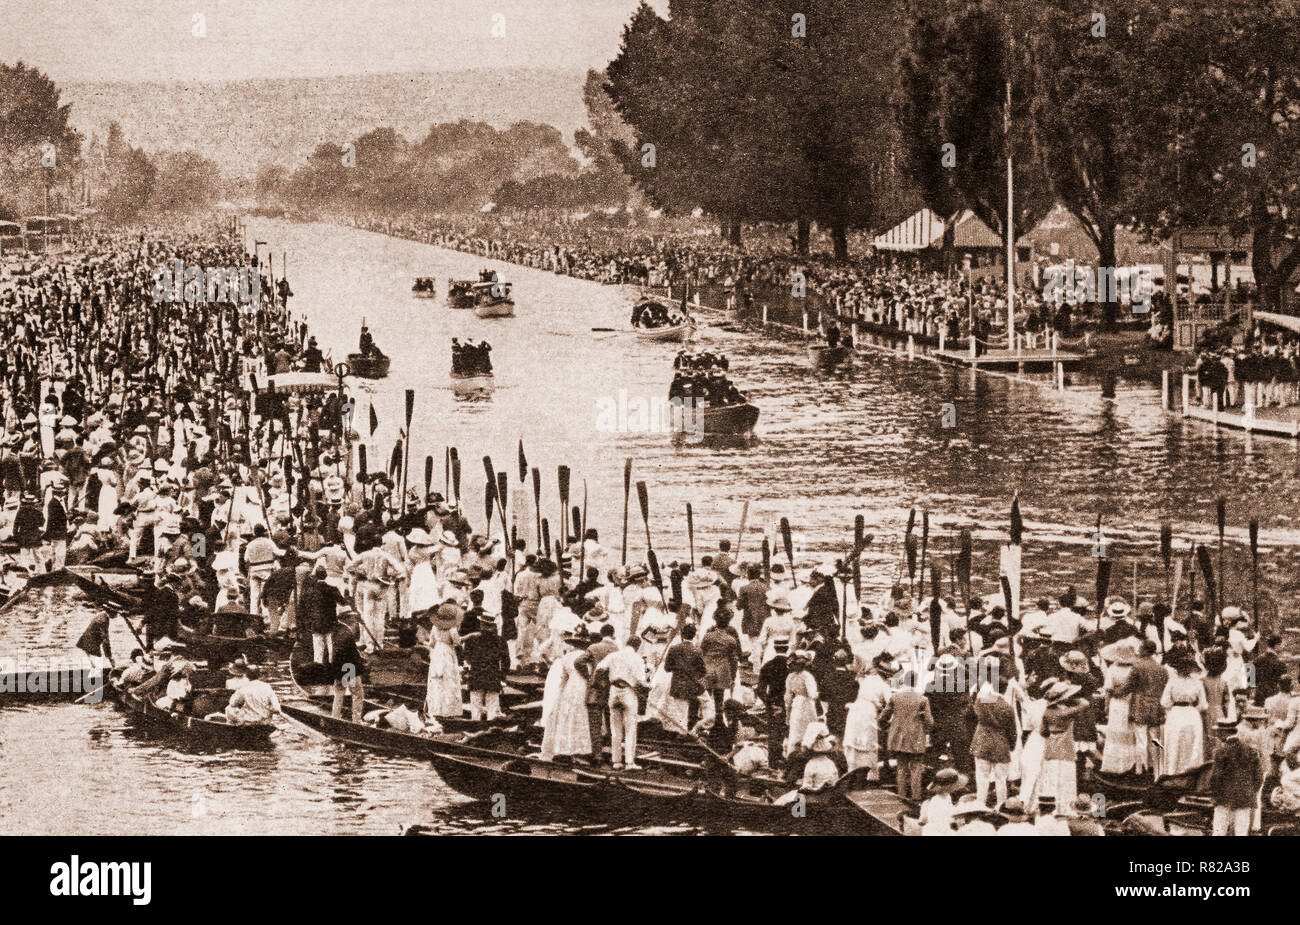 Oars raised in salute as the Royal Barge bearing  King George V and the Royal family makes its way down the regatta course on July 6th 1912 at Henley-on-Thames, a town on the River Thames in Oxfordshire, England.  It was the only occasion that the king attended Henley Royal Regatta, even though it became 'Royal' in 1851, when Prince Albert became patron of the regatta. Stock Photo